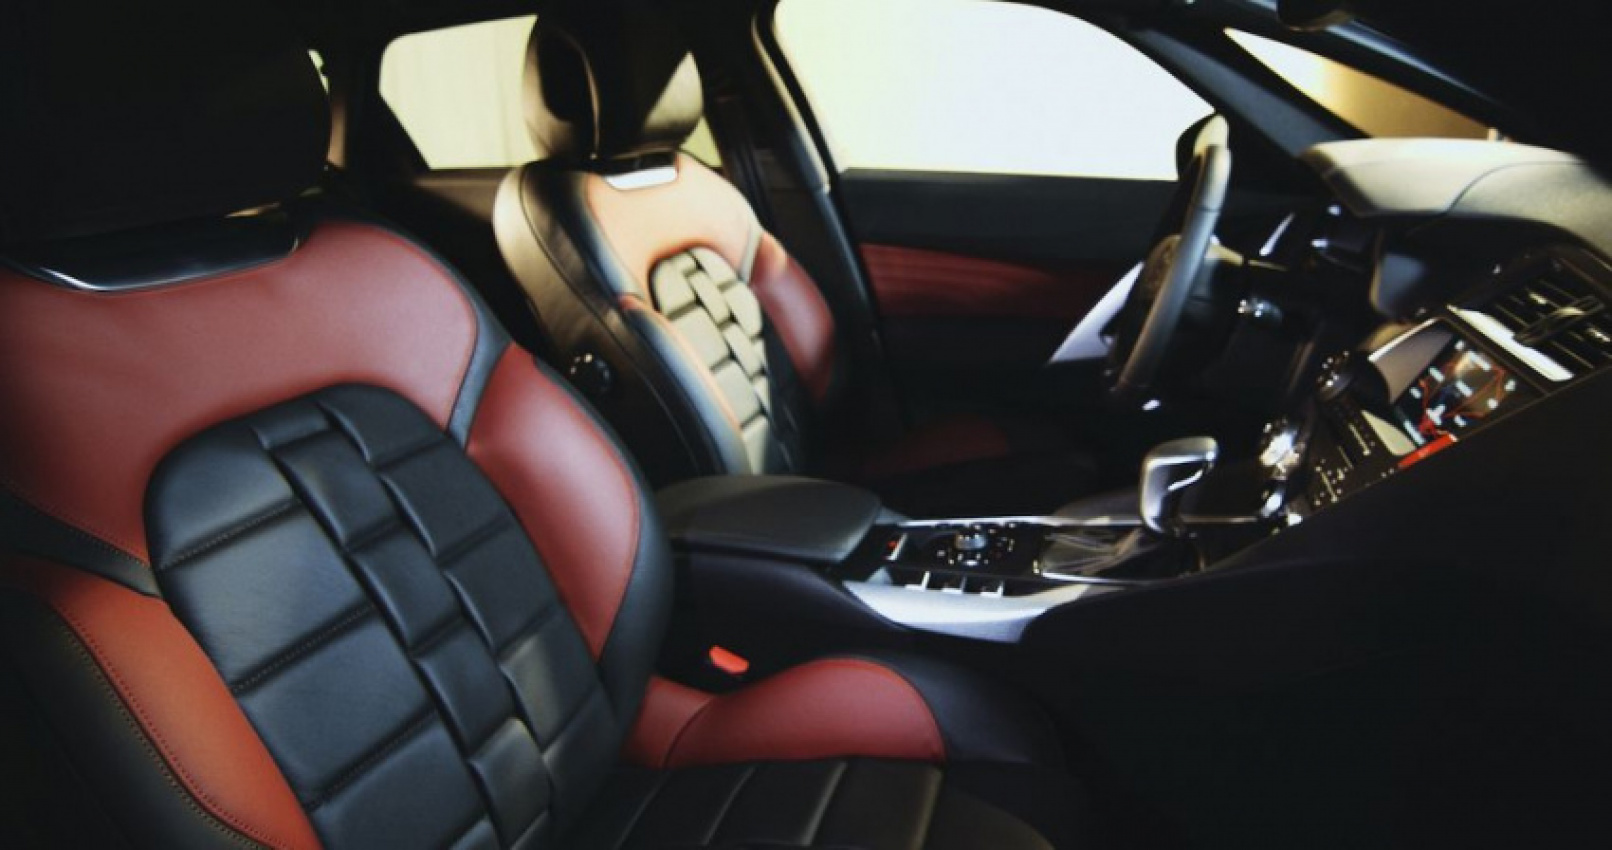 autos, cars, how to, reviews, car interior, detailing, fabric, how-to, insights, leather, maintenance, seats, how to, how to clean car seats: the stubborn, the ugly & the impossible